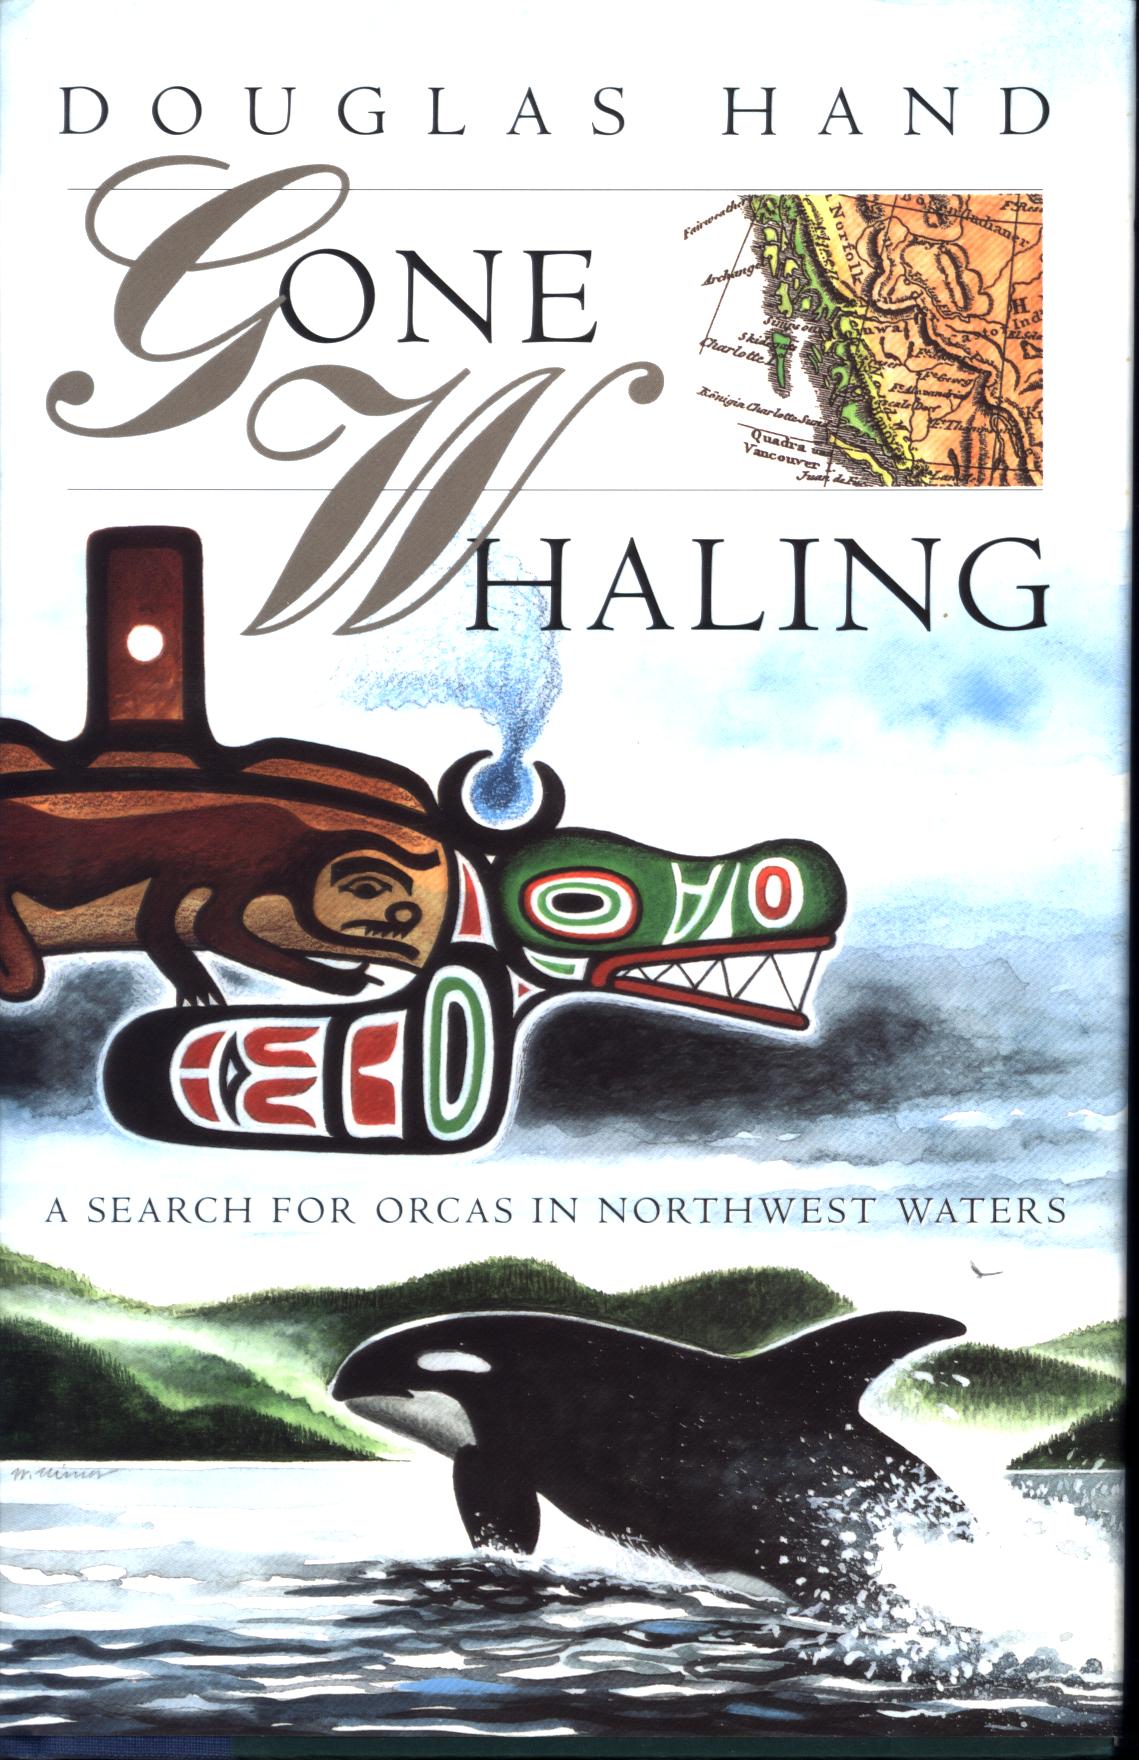 GONE WHALING: a search for orcas in Northwest waters.